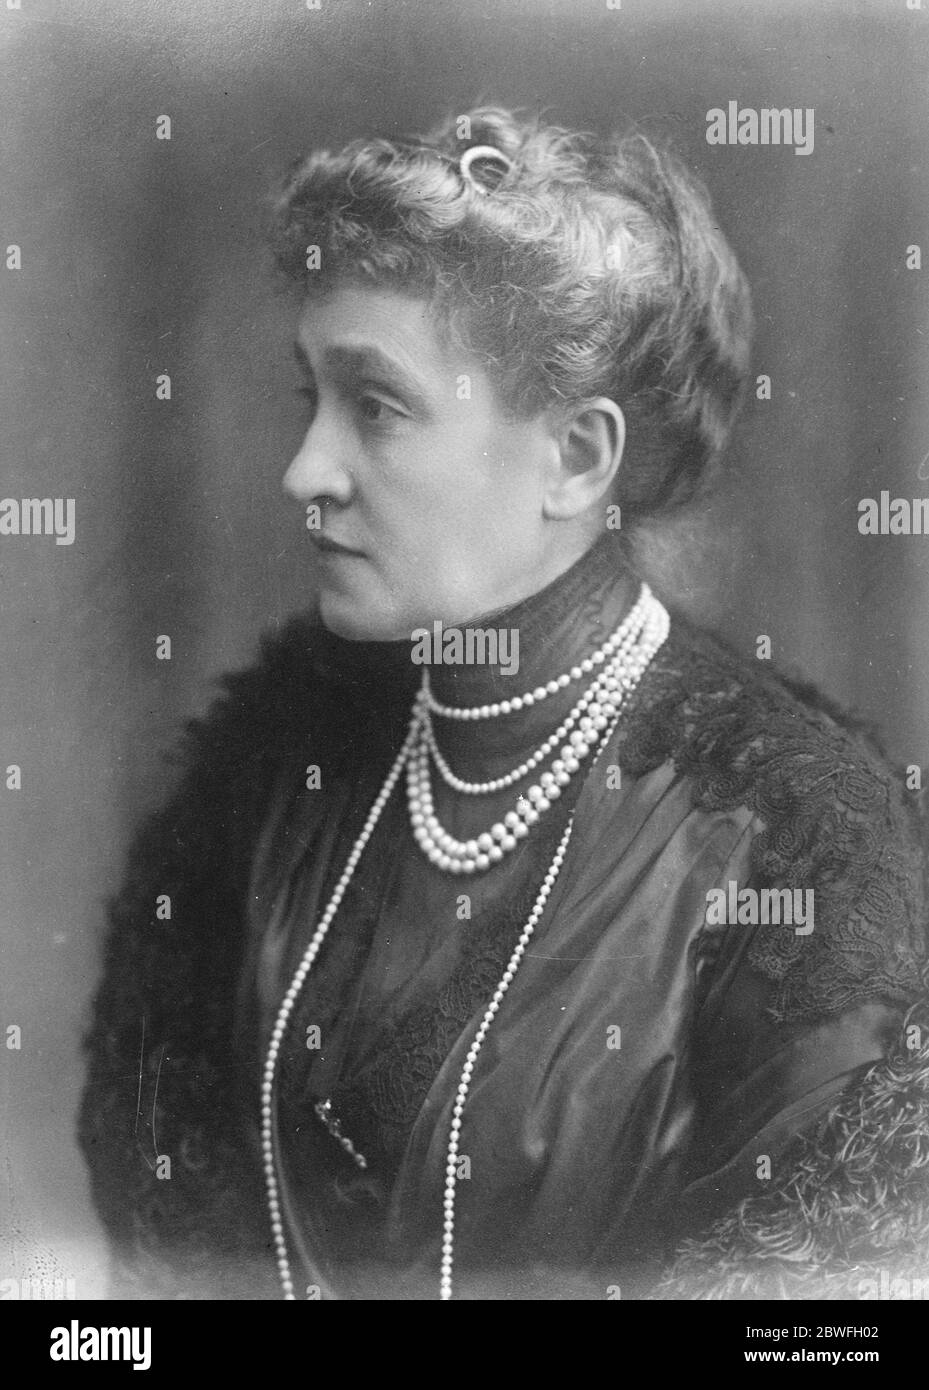 Portuguese Princess Down With Influenza The Dowager Grand Duchess Marie Anne of Luxembourg is suffering from influenza . 2 February 1923 Stock Photo